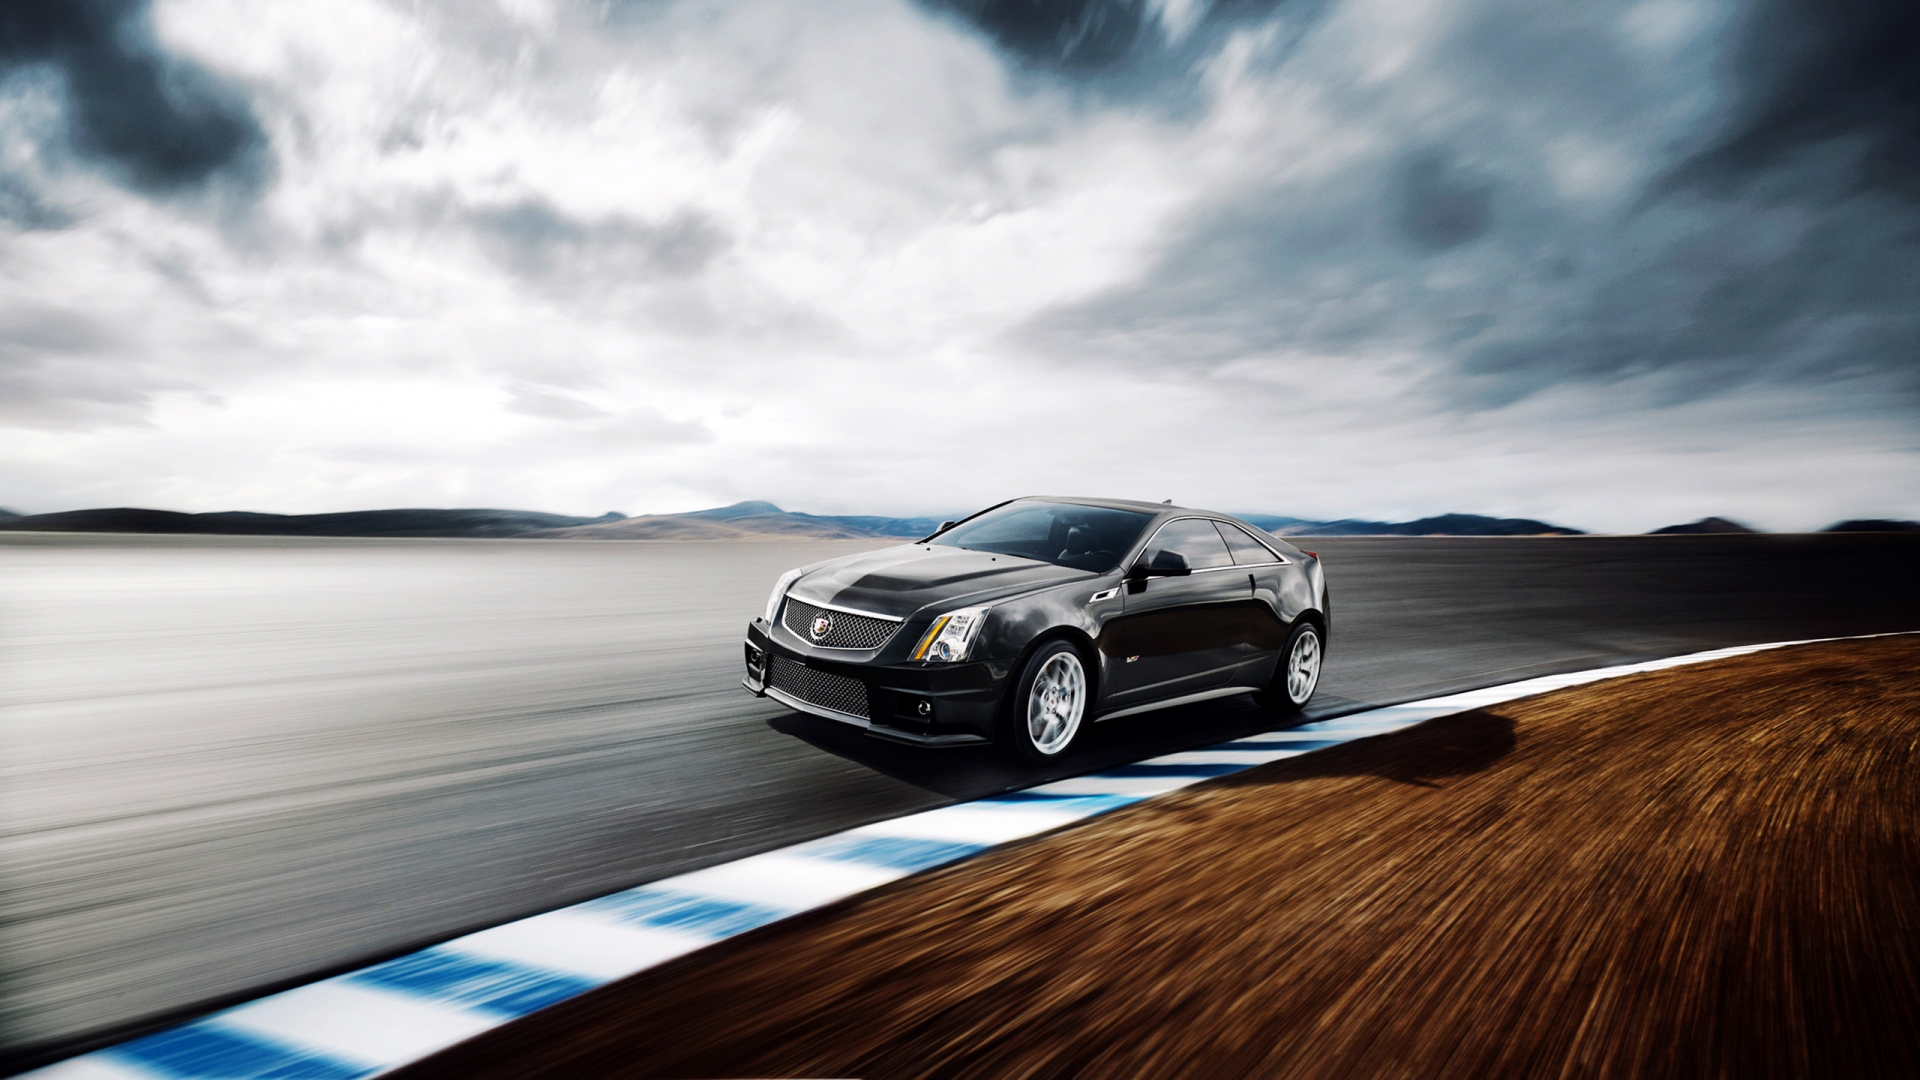 2011 Cadillac CTS V Coupe for 1920 x 1080 HDTV 1080p resolution